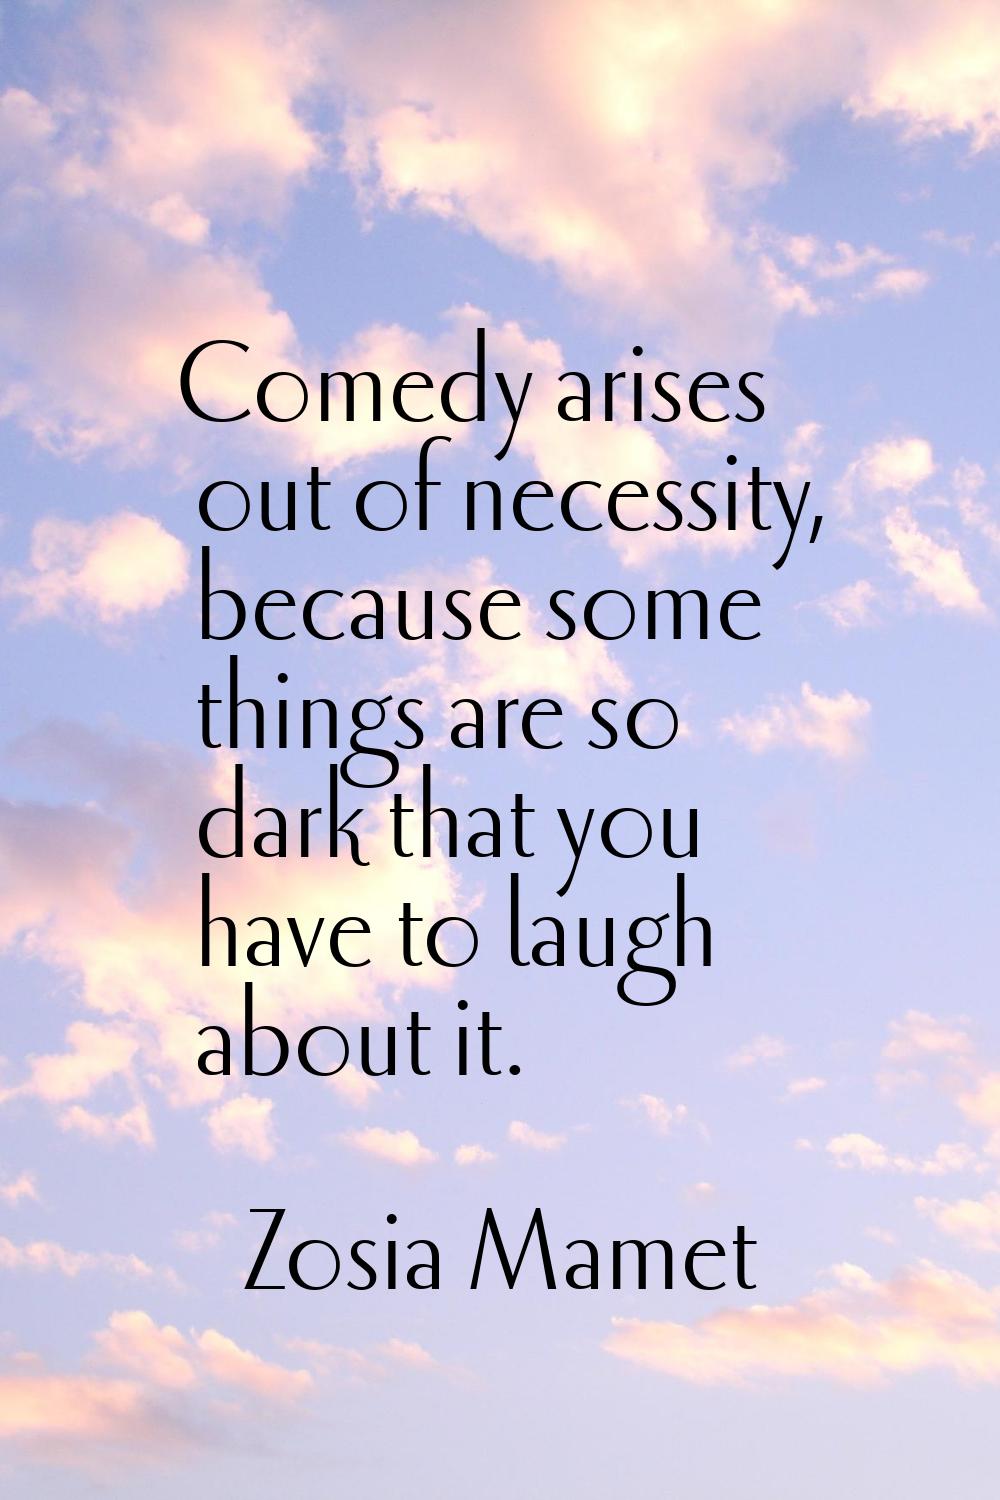 Comedy arises out of necessity, because some things are so dark that you have to laugh about it.